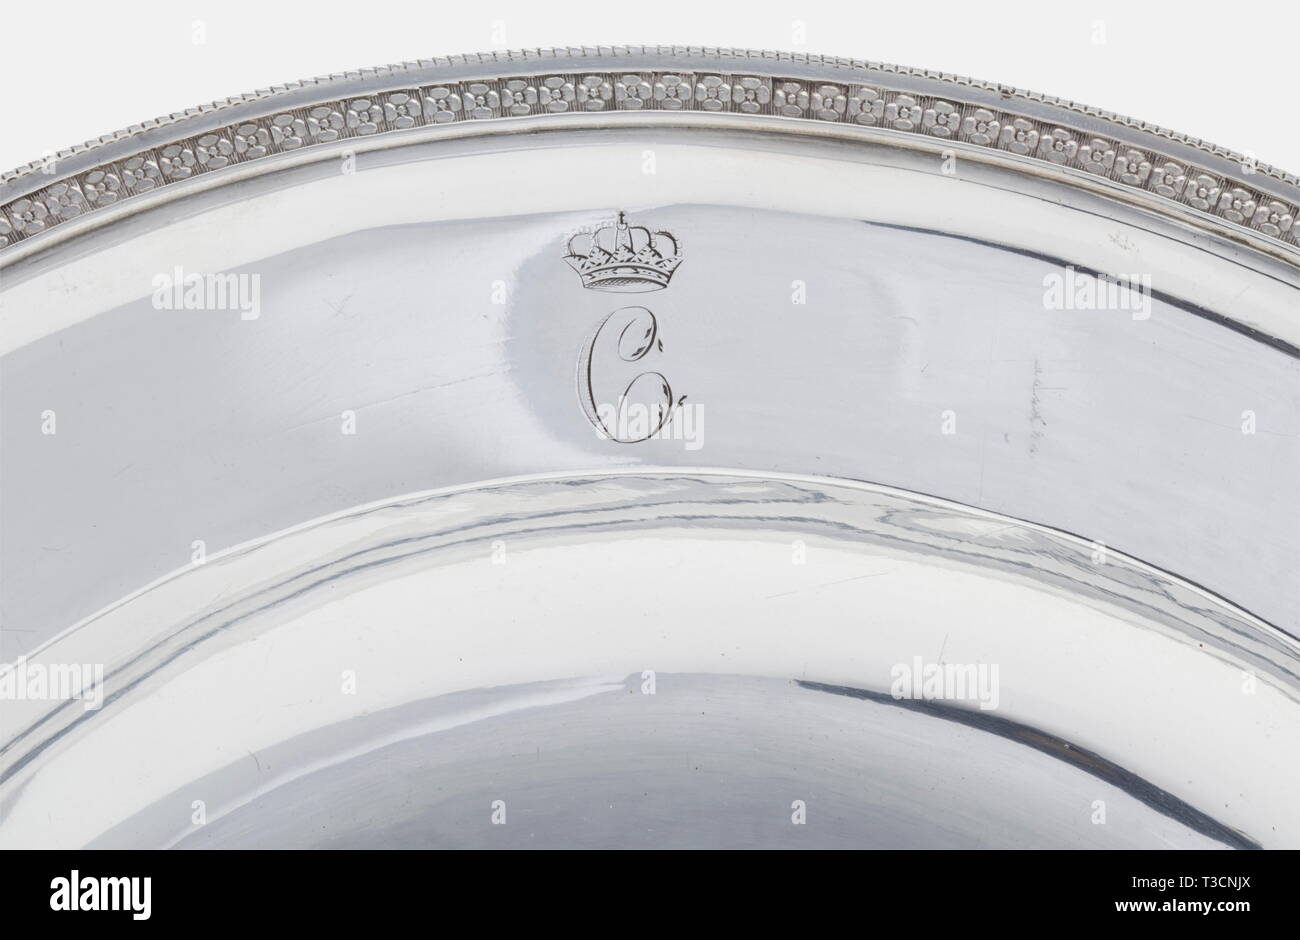 Queen Caroline of Bavaria (1776 - 1846), a silver plate from her table service, Anton Weißhaupt, Munich after 1806. Silver with the monogram 'C' below the Bavarian royal crown engraved on the border. The rim is decorated with a delicate floral frieze. The bottom bears the master's mark 'AW', the Munich Kindl (child) mark over a 'B' and the scratched marks, '2 M:15 1/4'. Diameter 30.2 cm. Weight 821 g. Very rare plate. In 1797, Princess Caroline von Baden married the then Duke Maximilian Joseph von der Pfalz-Zweibrücken, who became King of Bavaria, Additional-Rights-Clearance-Info-Not-Available Stock Photo